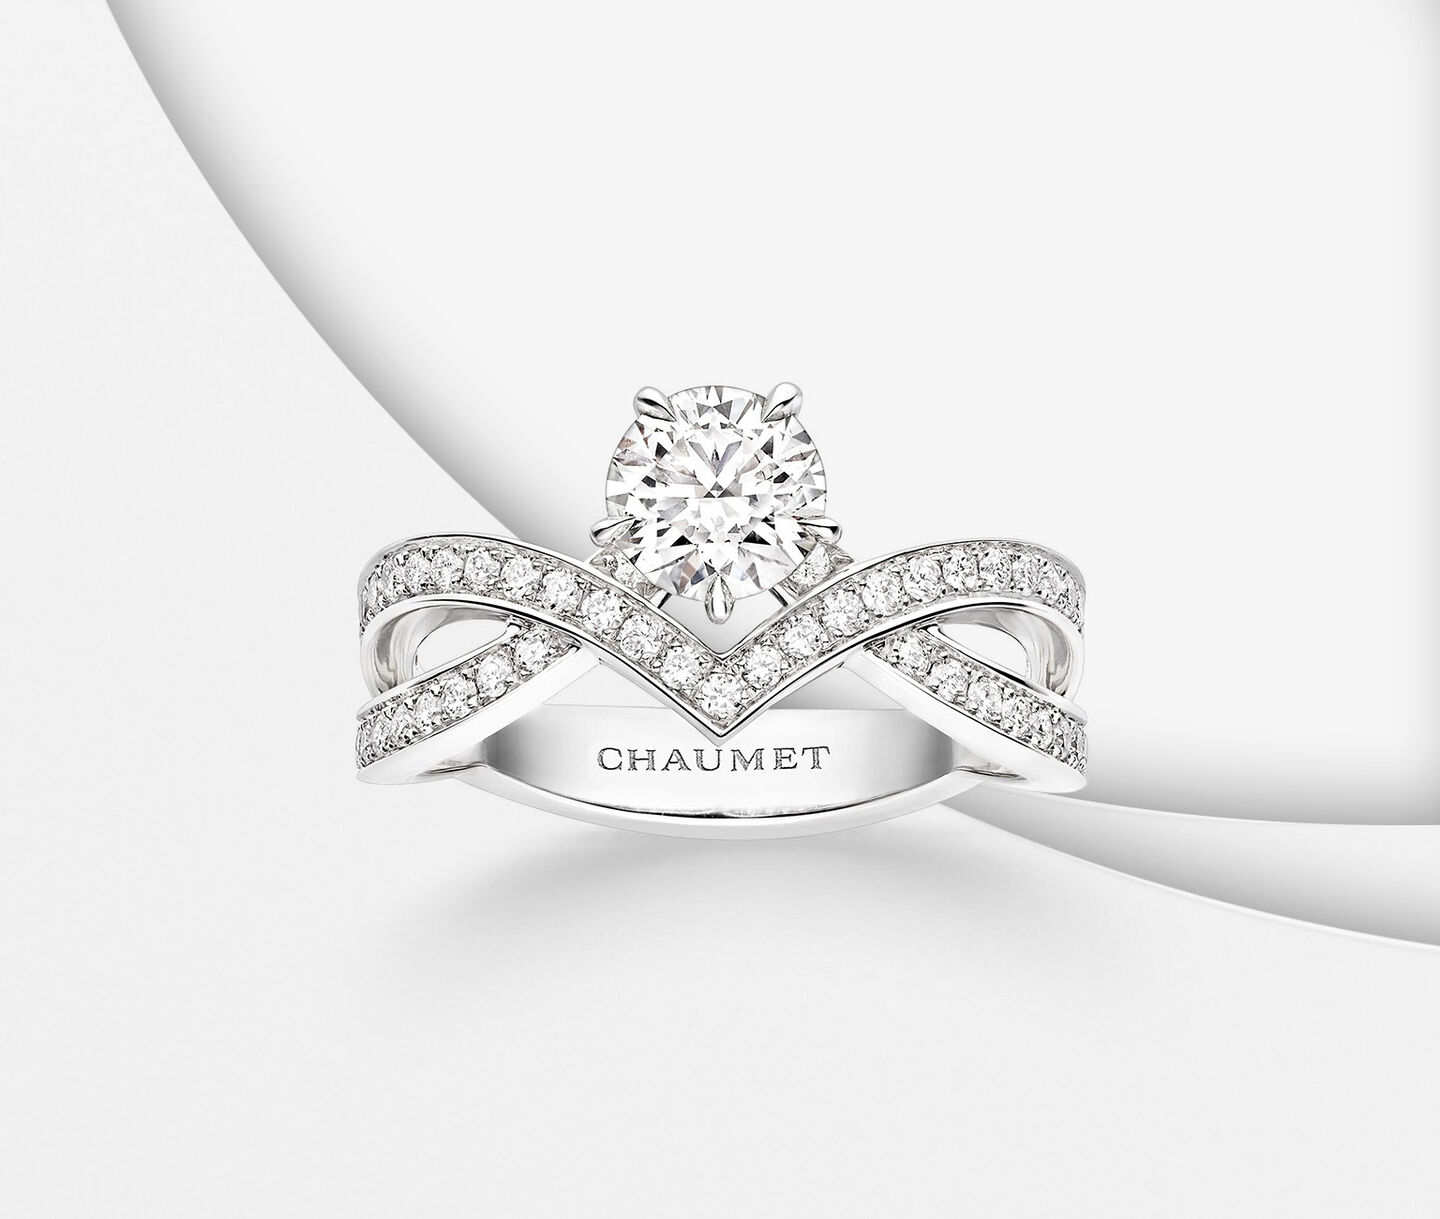 A Chaumet Joséphine diamond engagement ring on a white background.